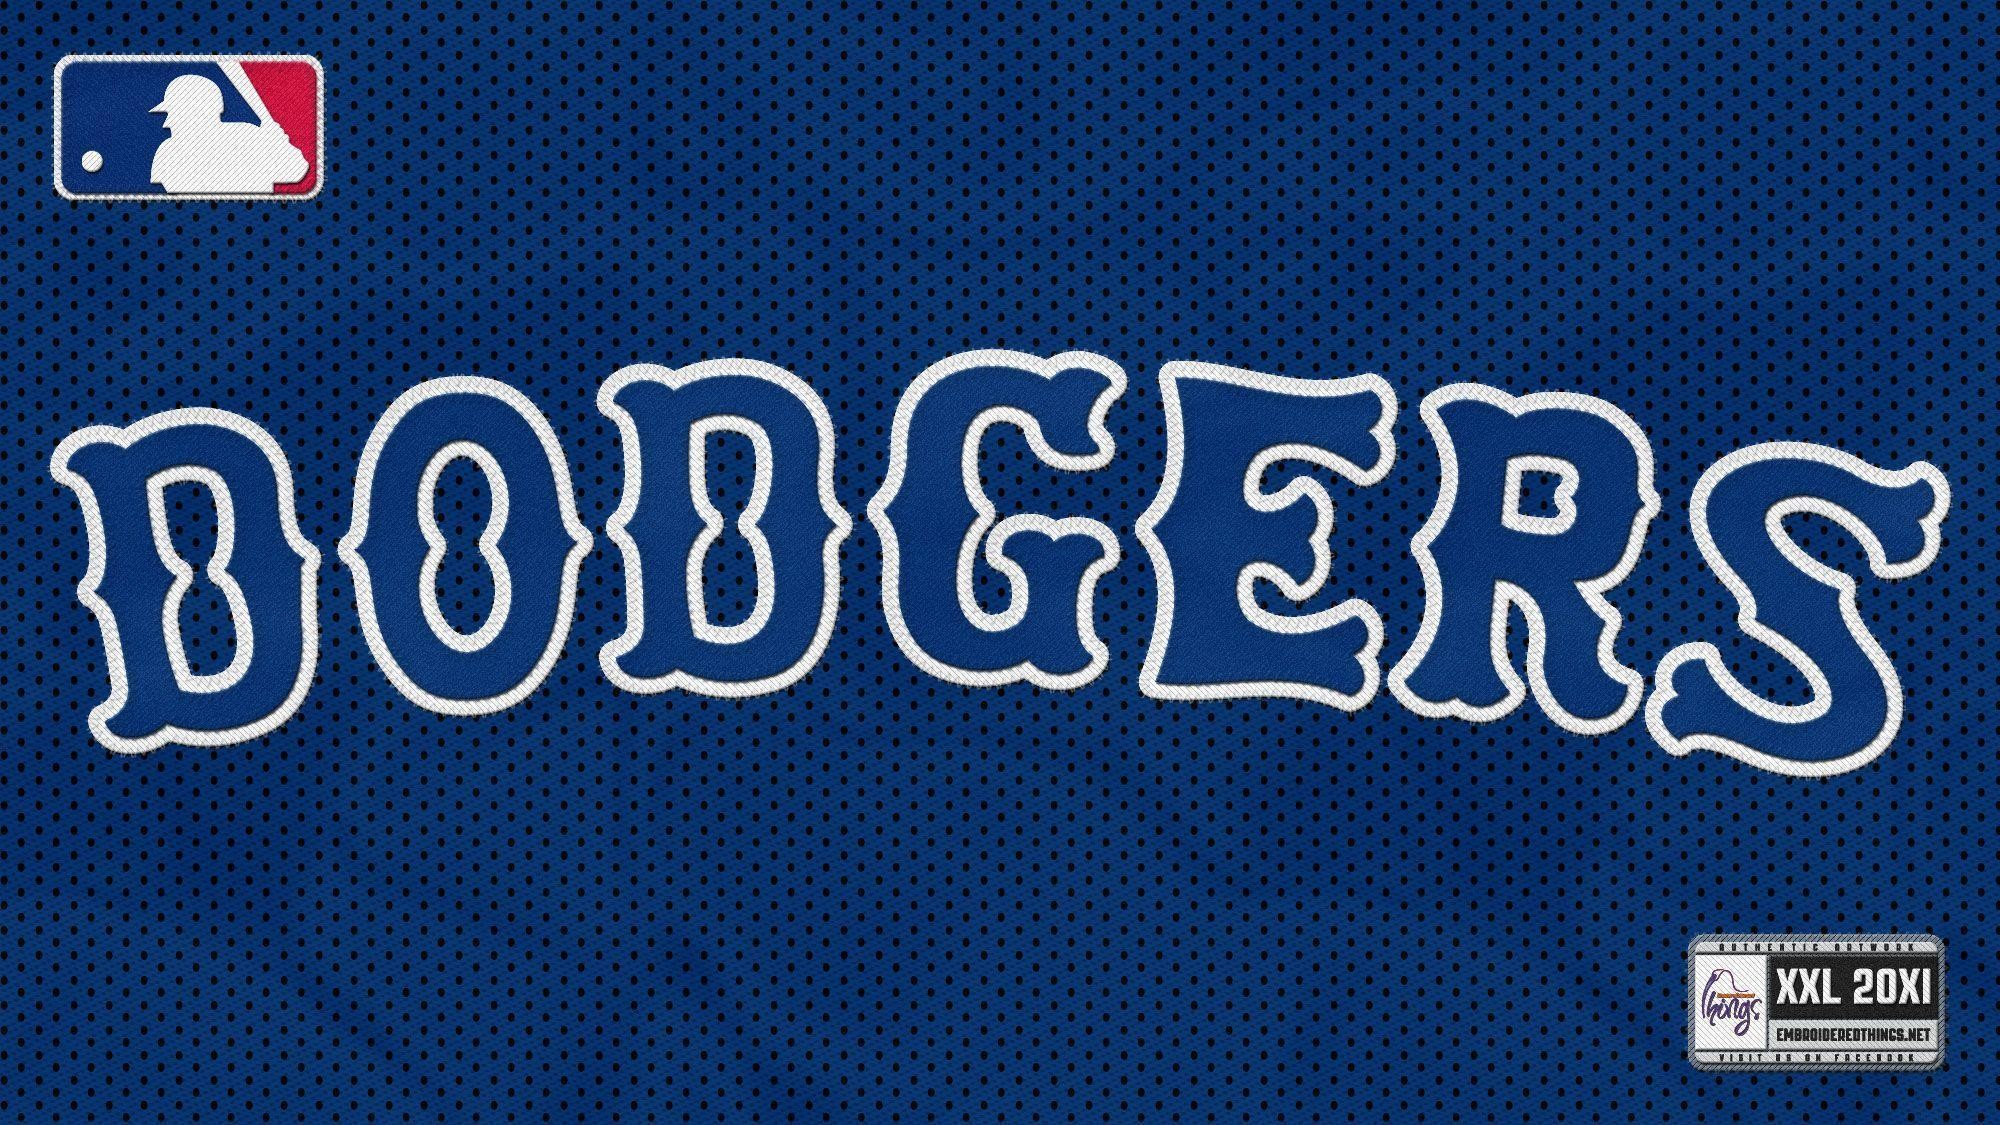 Los Angeles Dodgers wallpapers Los Angeles Dodgers background